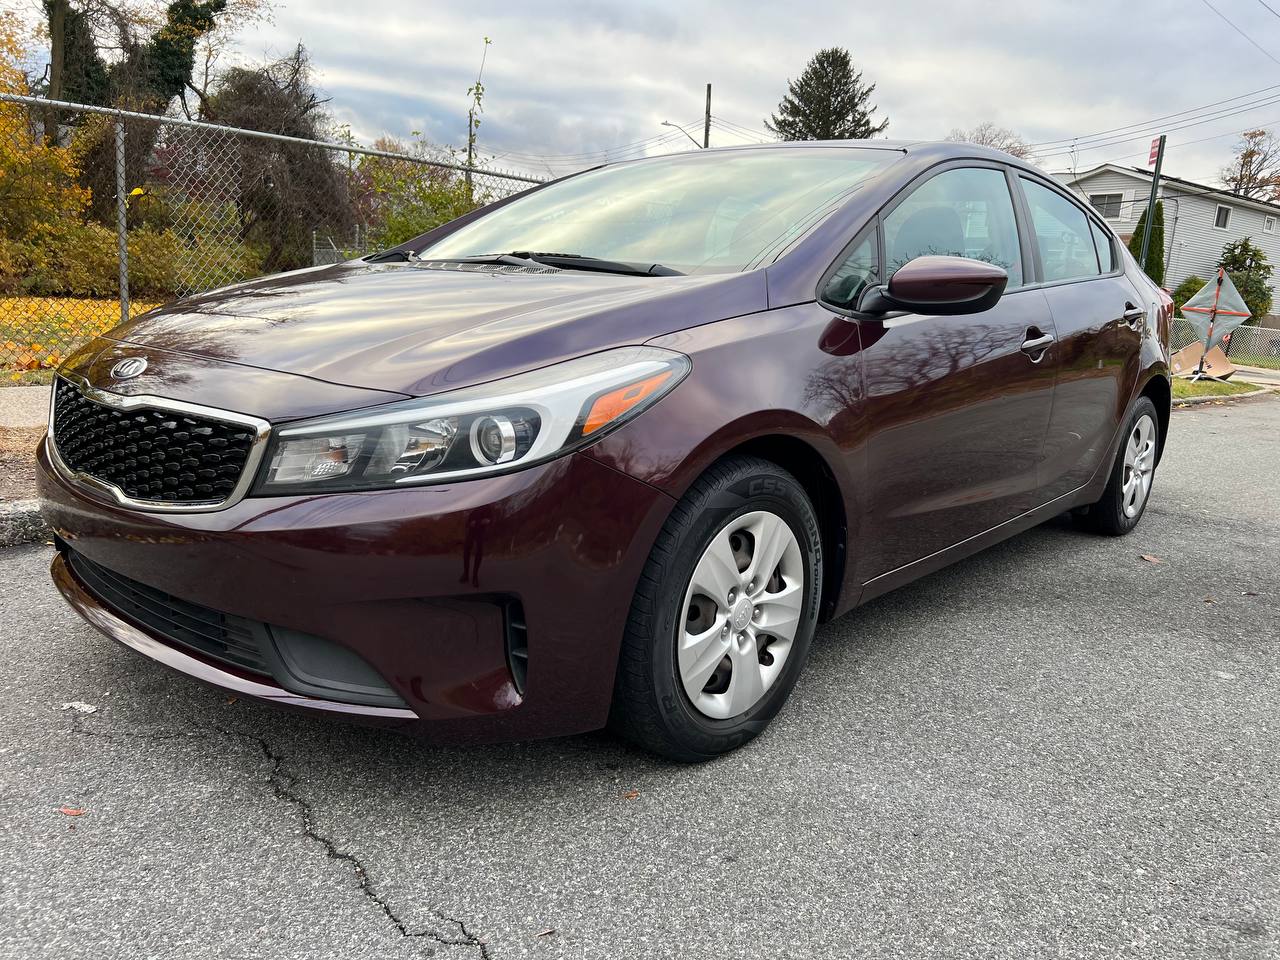 Used Car - 2018 Kia Forte LX for Sale in Staten Island, NY